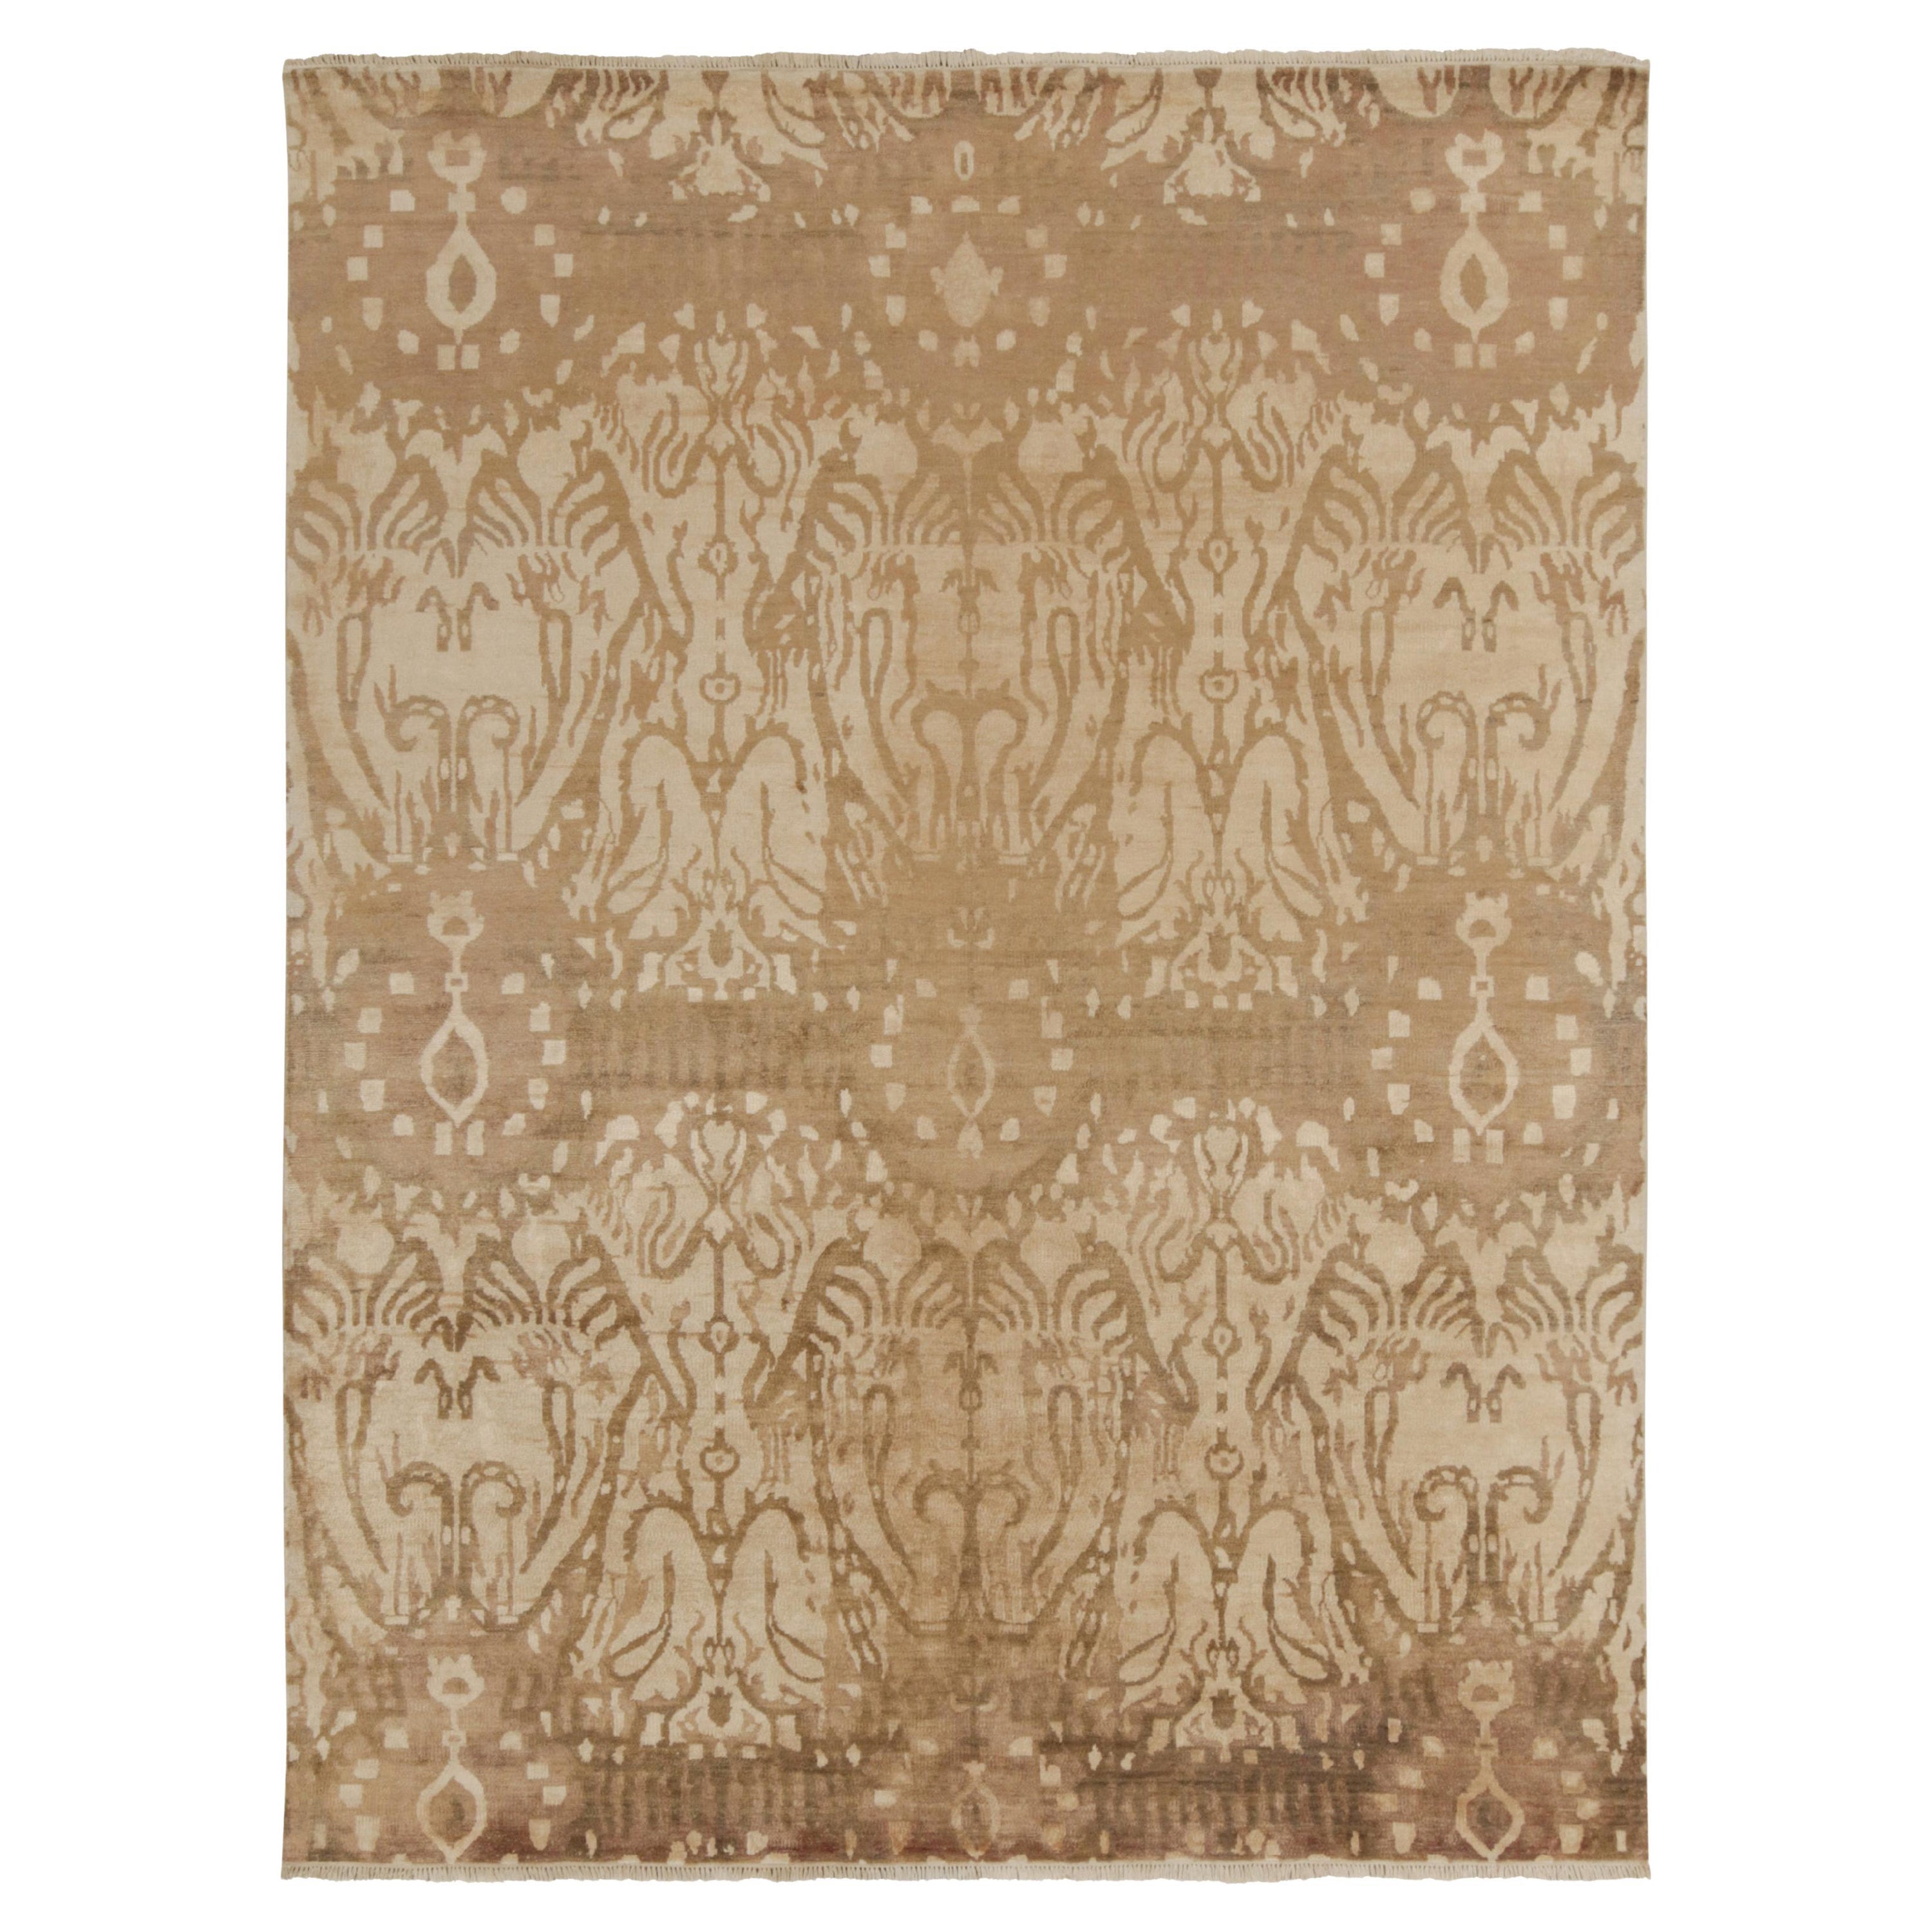 Rug & Kilim’s Classic-Style Contemporary Rug in Beige-Brown Ikats Patterns For Sale